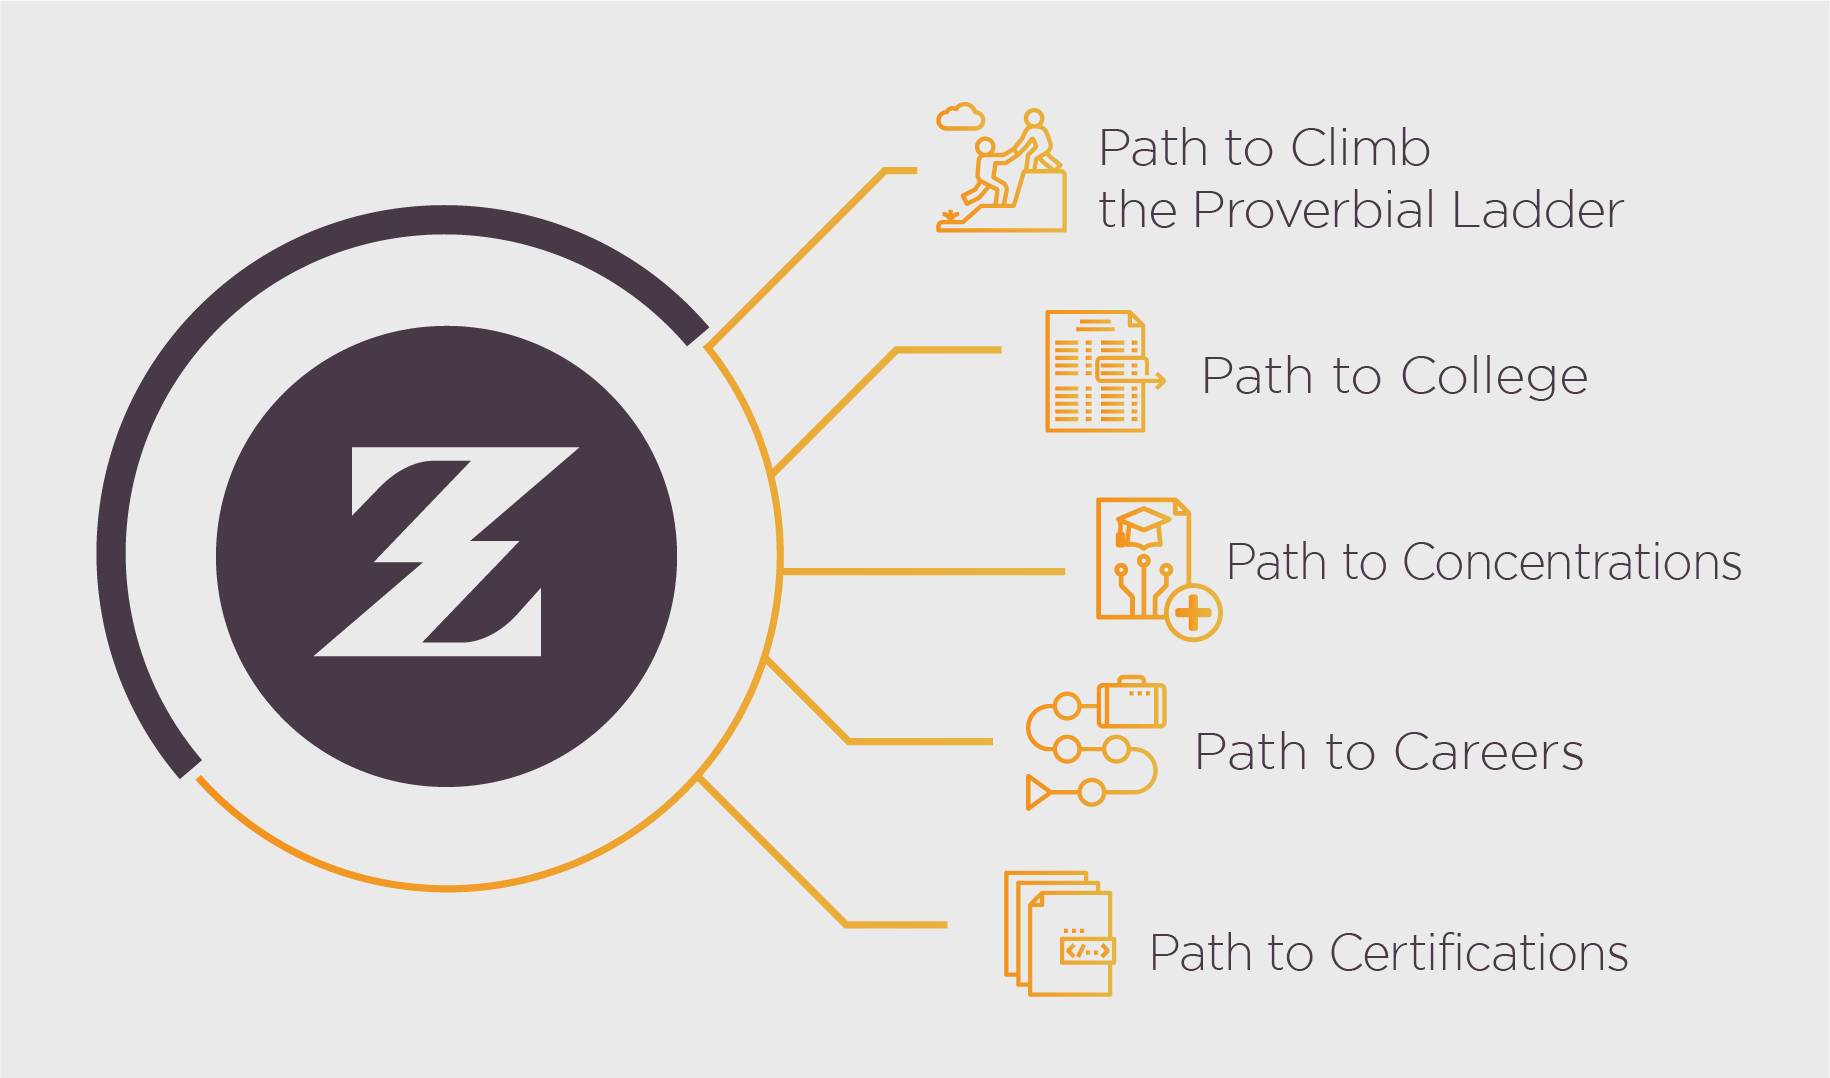 A diagram showing the different paths branching off of the Zeus Z logo